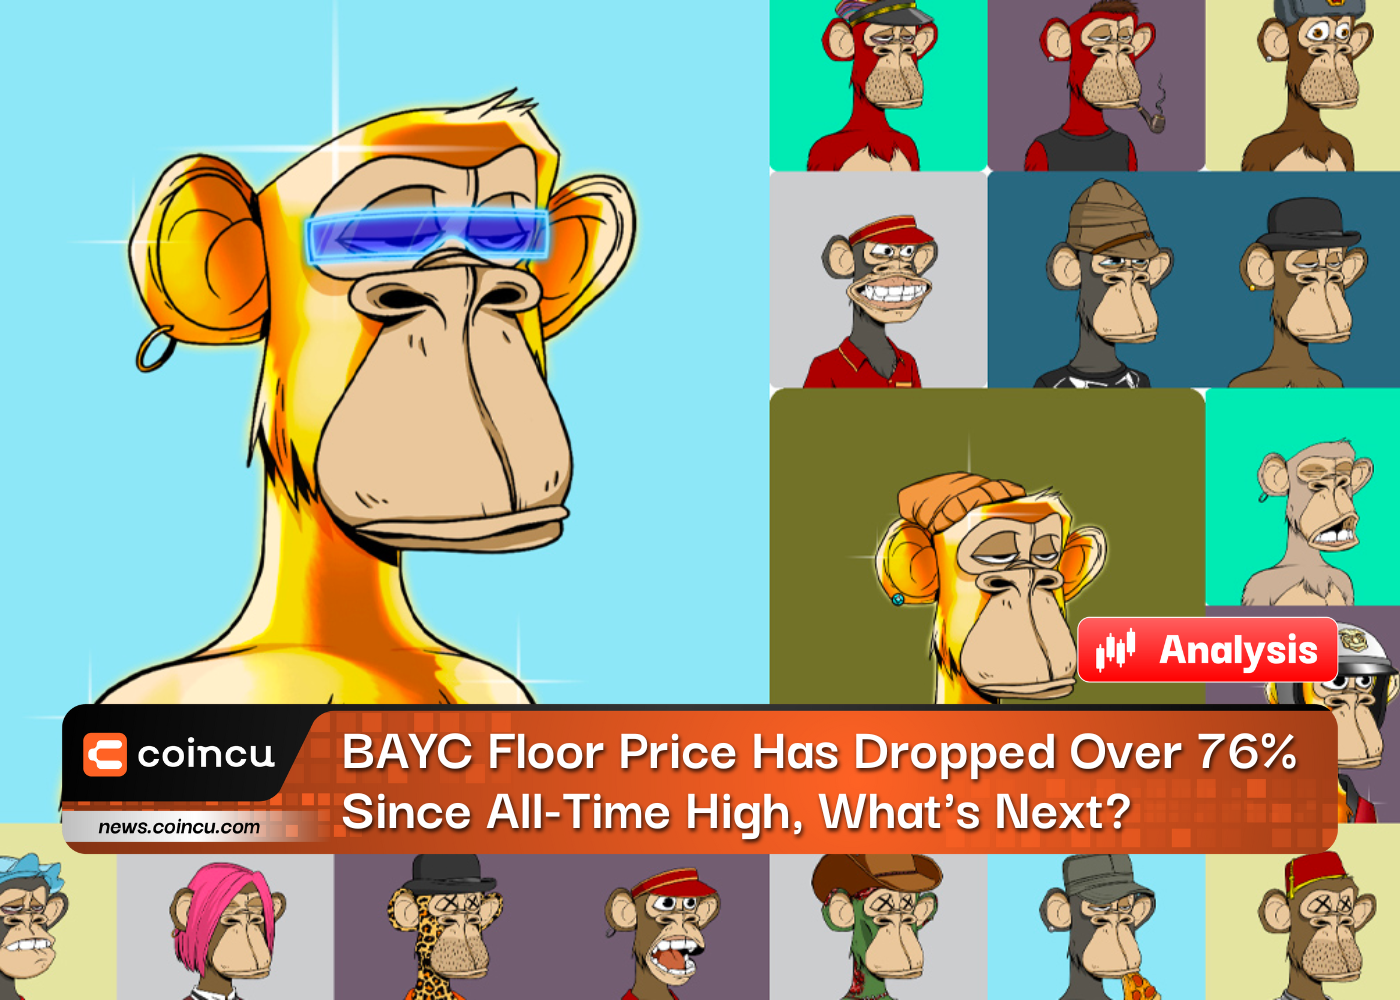 BAYC Floor Price Has Dropped Over 76% Since All-Time High, What's Next?